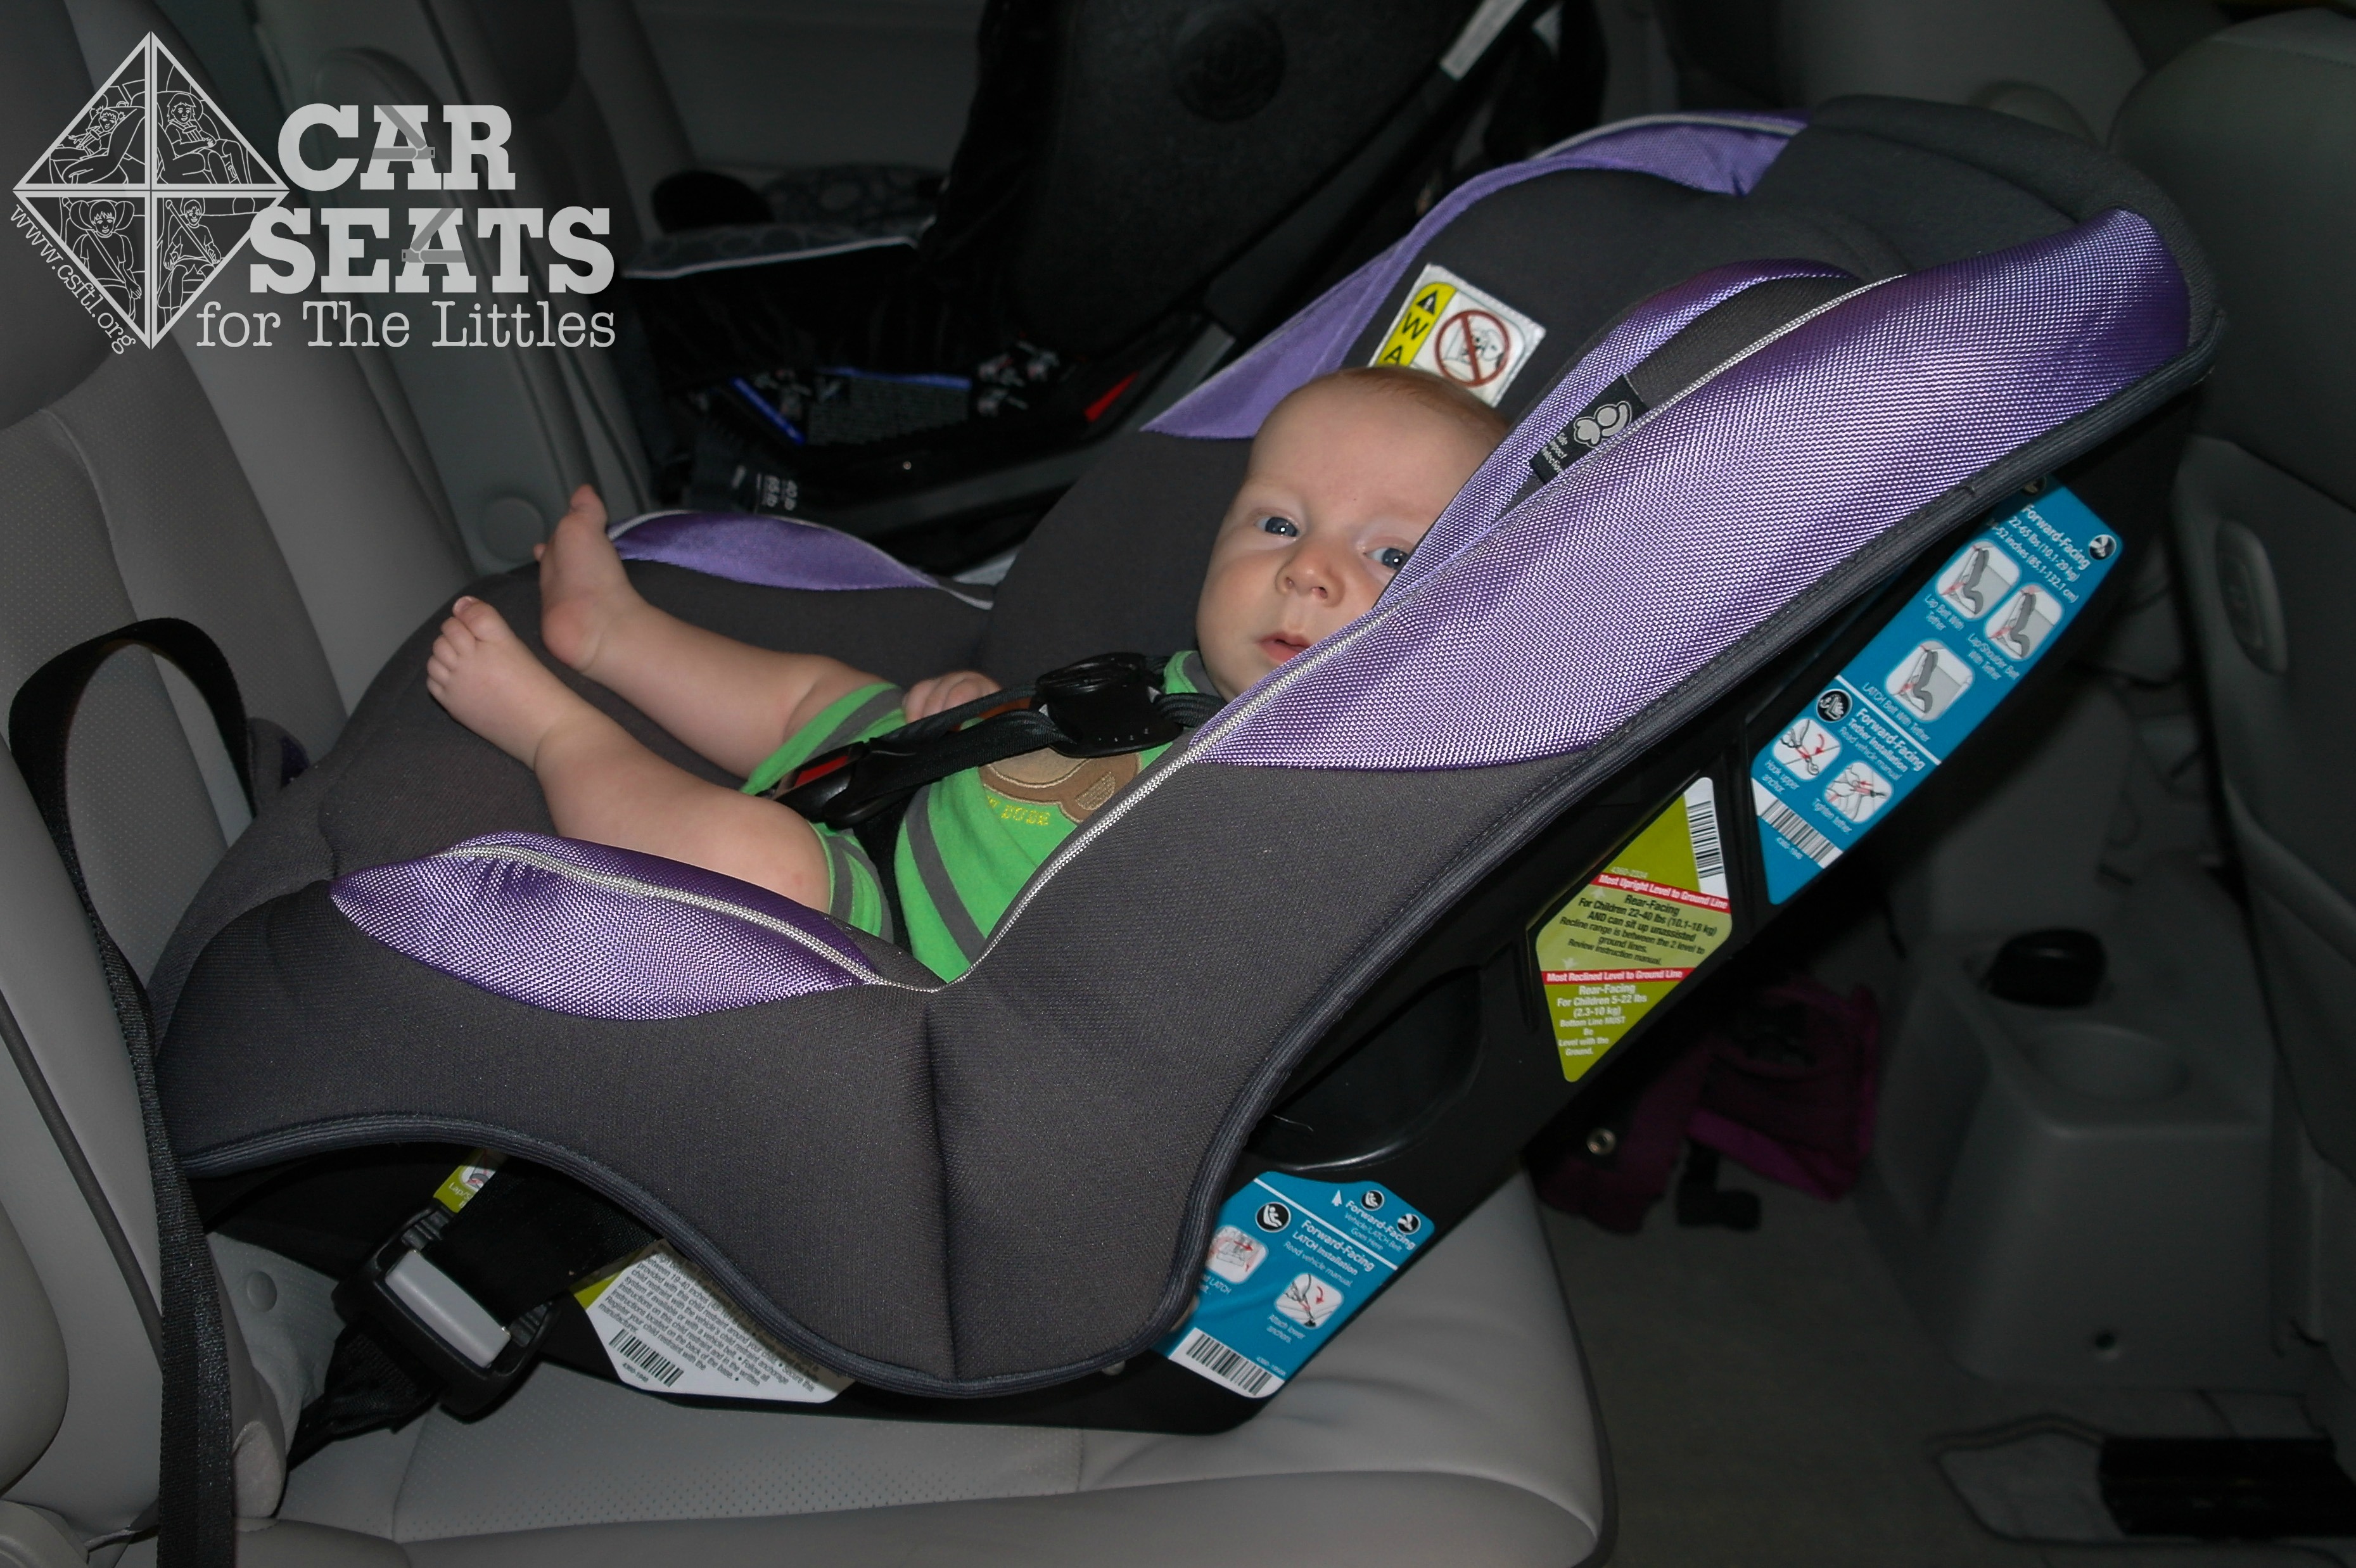 Guide 65 Car Seat Installation, How To Set Up Forward Facing Car Seat